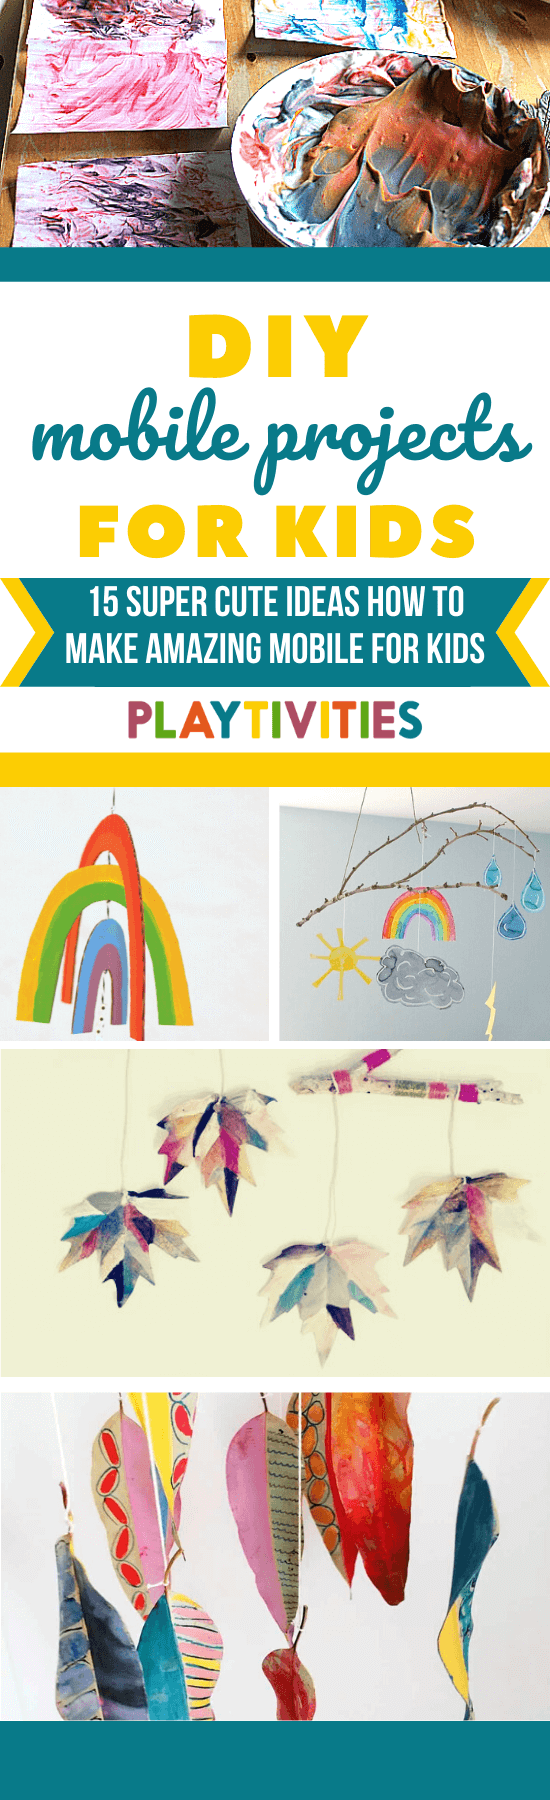 Mobile Projects For Kids